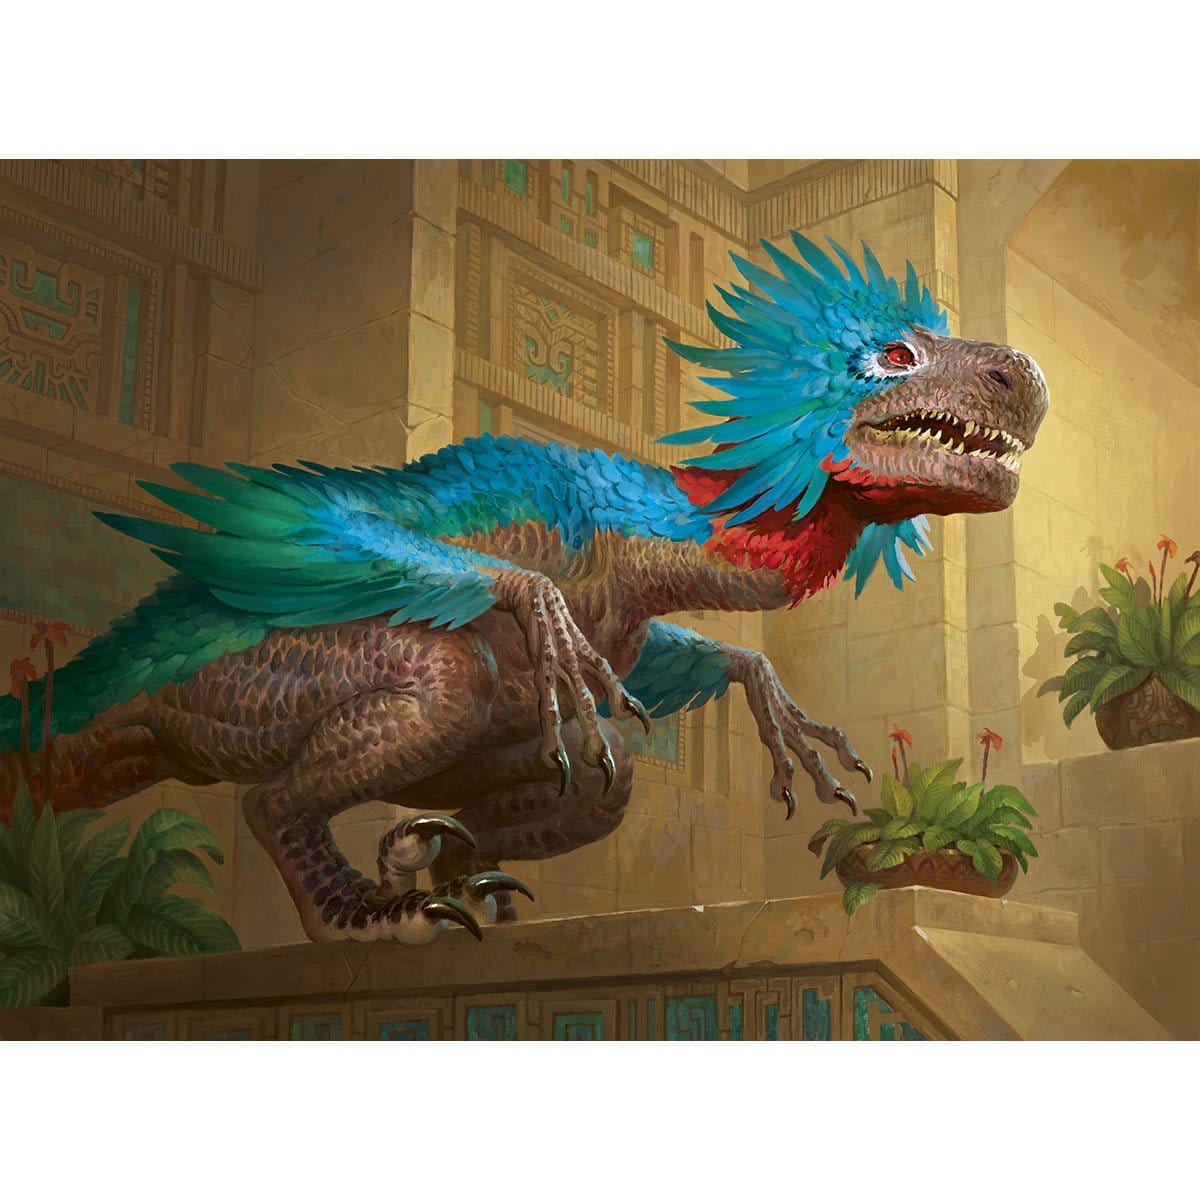 Orazca Raptor Print - Print - Original Magic Art - Accessories for Magic the Gathering and other card games